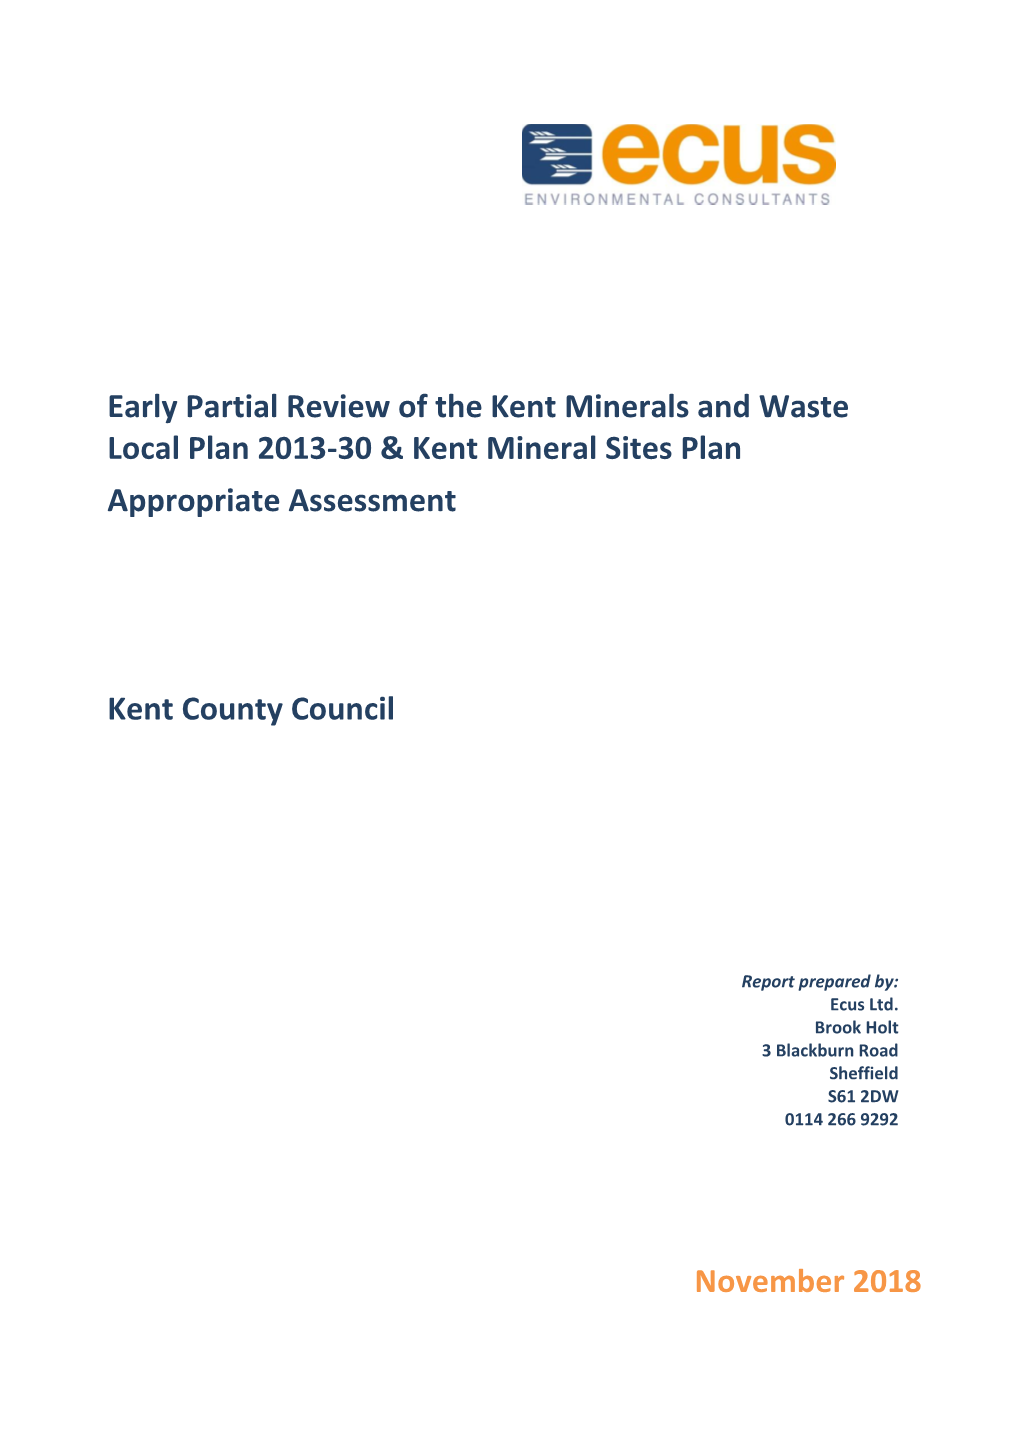 November 2018 Early Partial Review of the Kent Minerals and Waste Local Plan 2013-30 & Kent Mineral Sites Plan Appropriate A